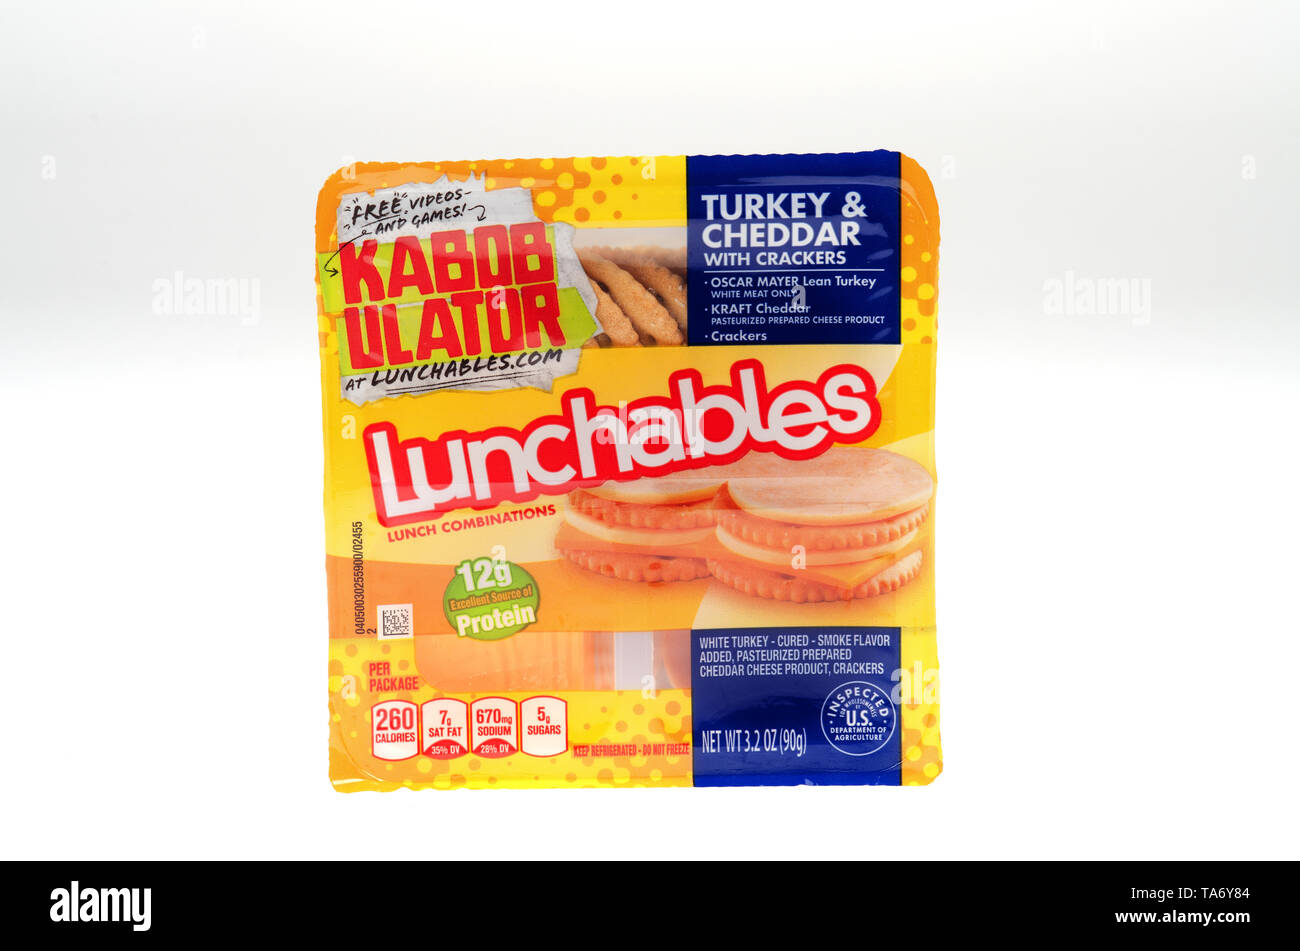 Oscar Mayer Lunchables turkey with cheese and crackers by Kraft Heinz Stock Photo